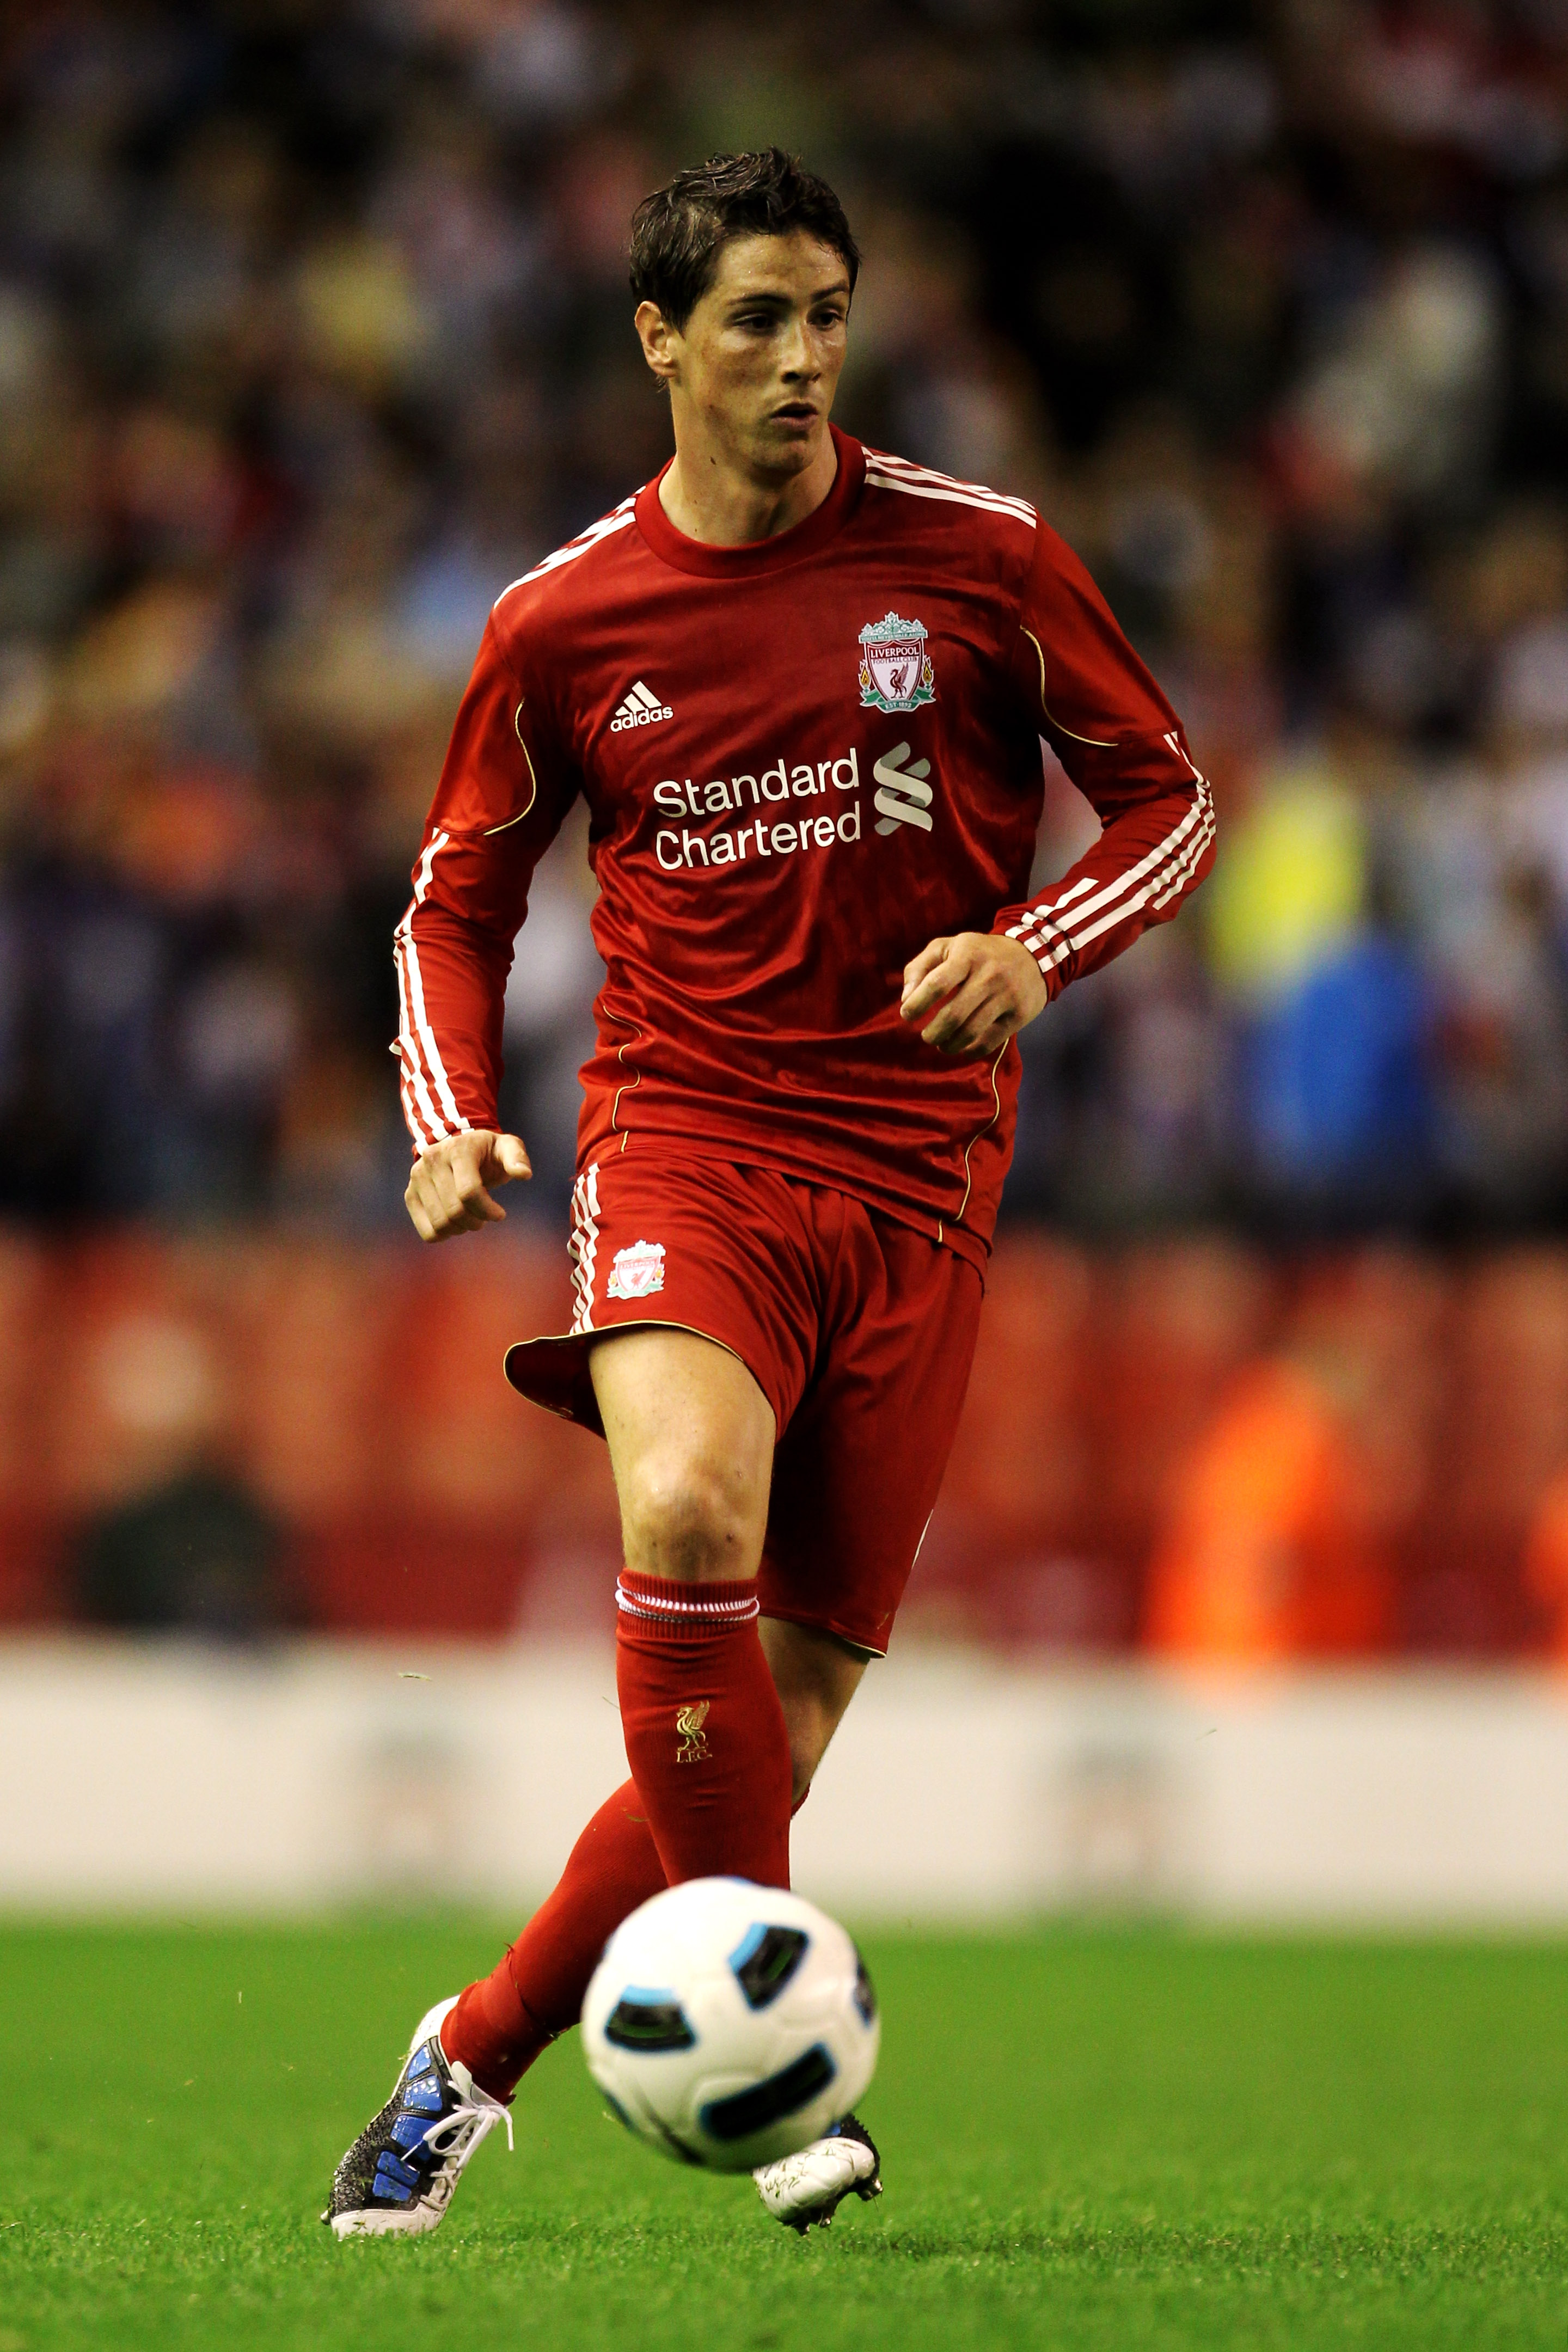 LIVERPOOL, ENGLAND - AUGUST 19:  Fernando Torres of Liverpool in action during the UEFA Europa League play-off first leg match beteween Liverpool and Trabzonspor at Anfield on August 19, 2010 in Liverpool, England.  (Photo by Alex Livesey/Getty Images)